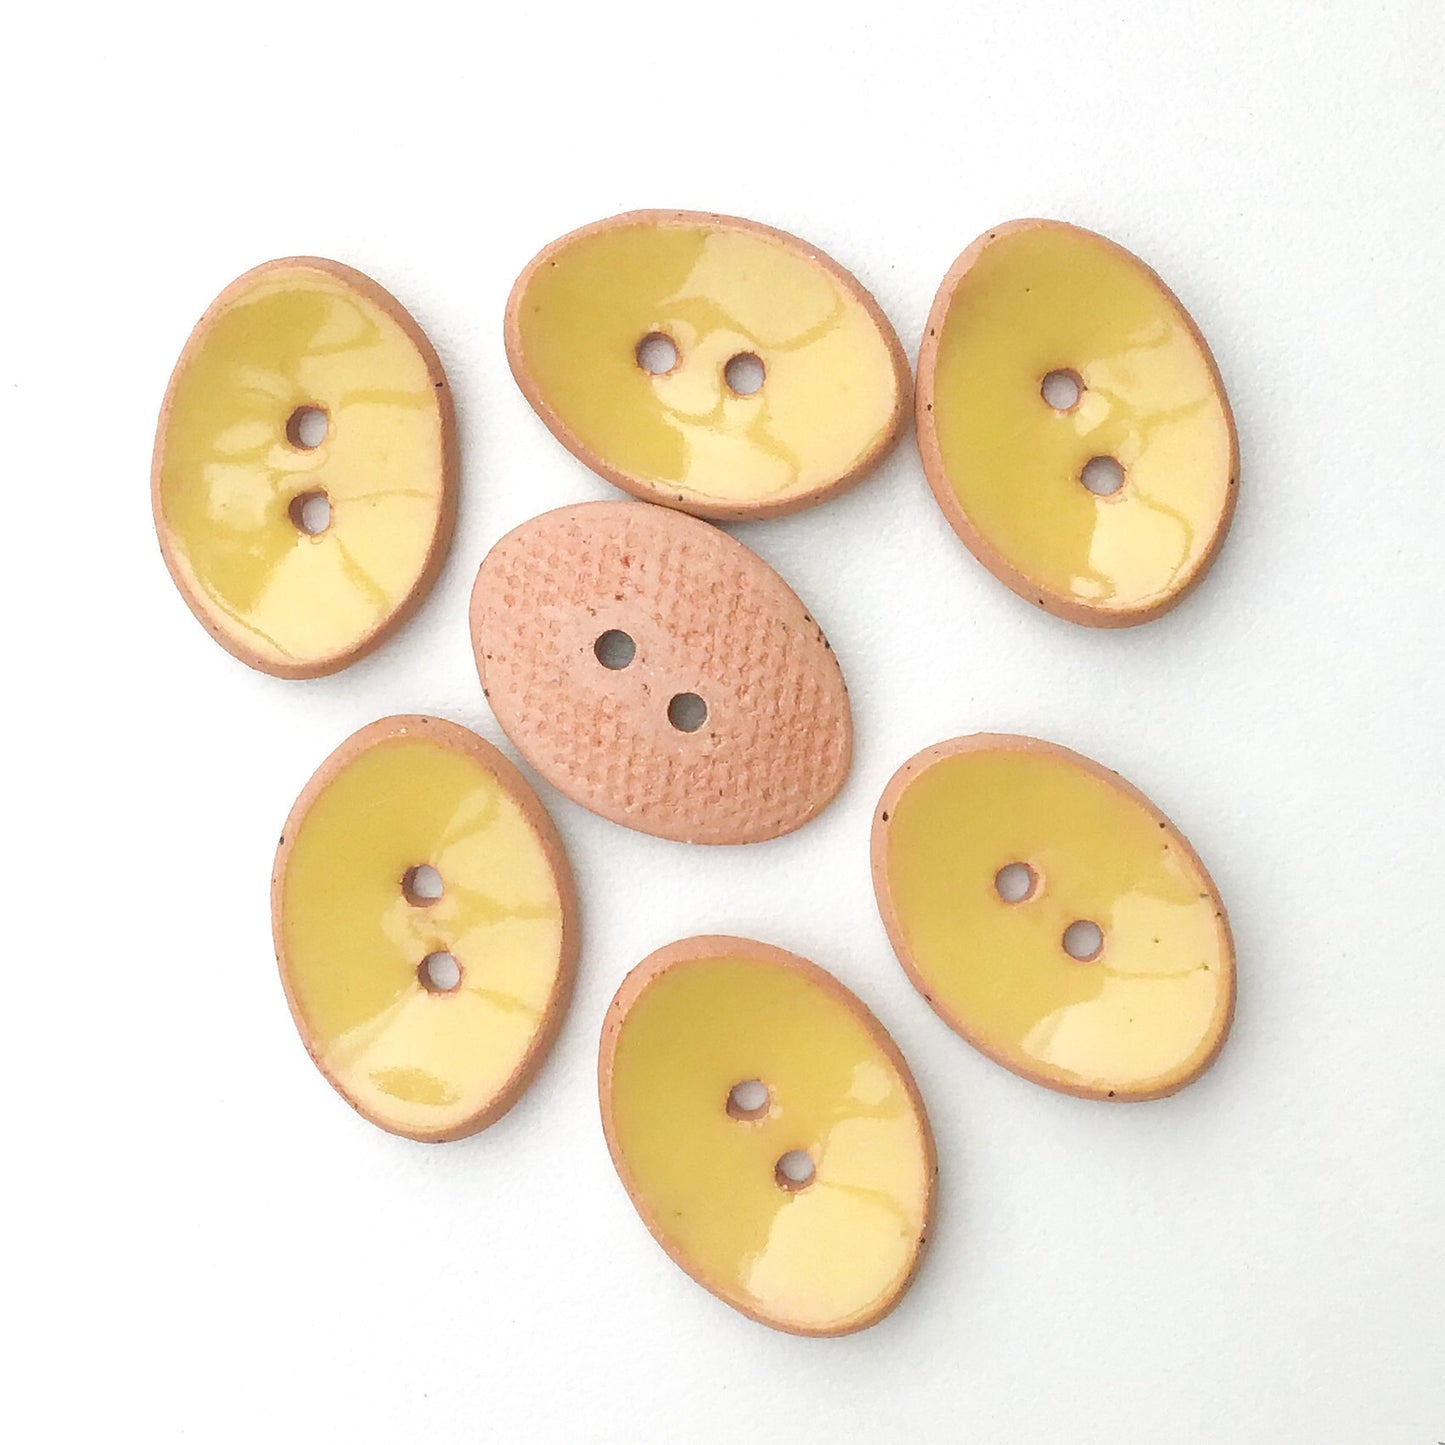 Oval Ceramic Buttons - Light Yellow Clay Buttons - 5/8" x 7/8" - 7 Pack